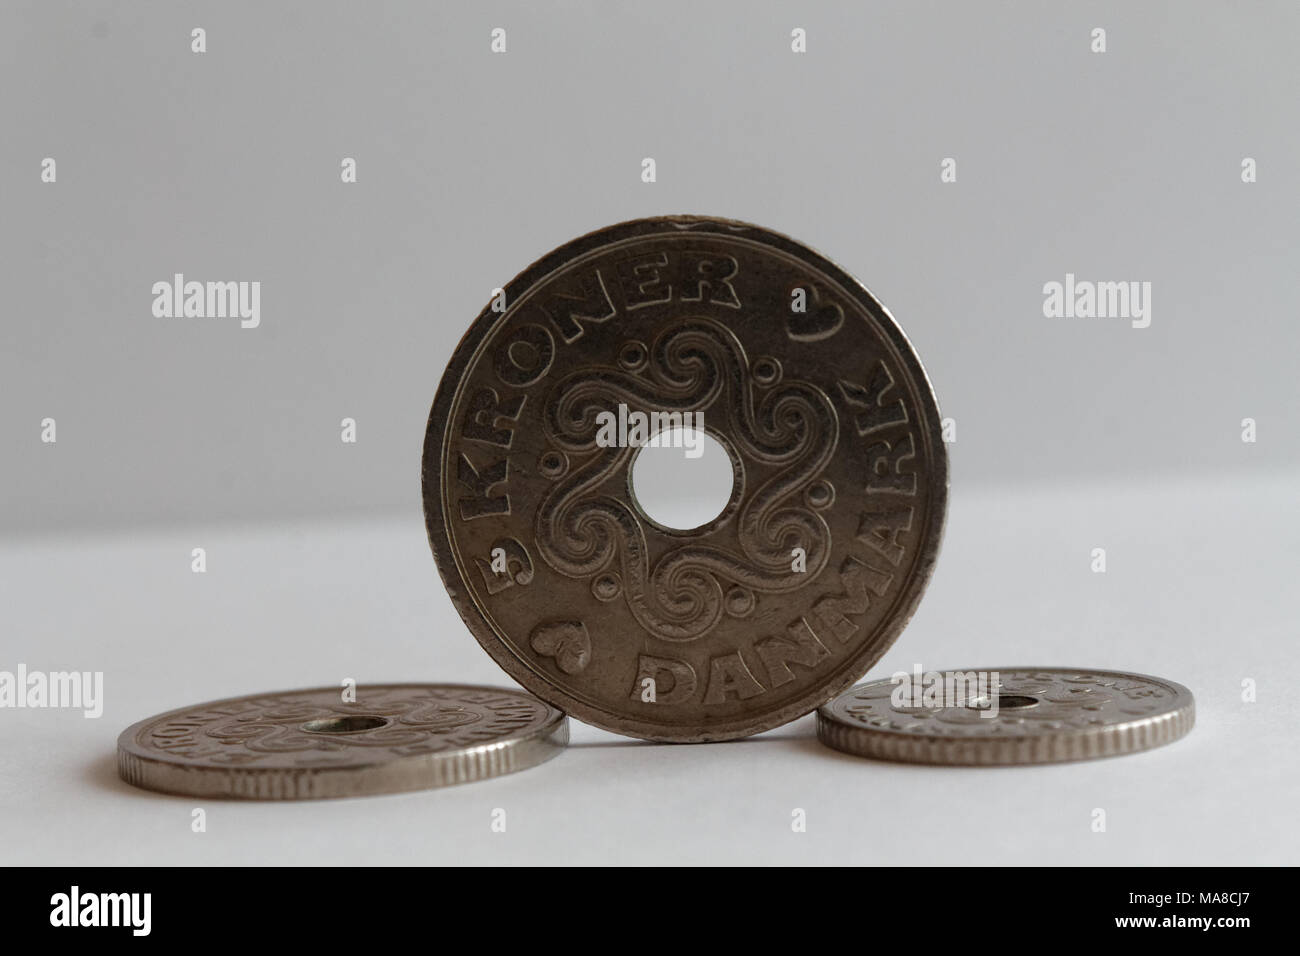 Three Denmark coins lie on isolated white background Front coin Denomination is 5 krone (crown) - back side Stock Photo